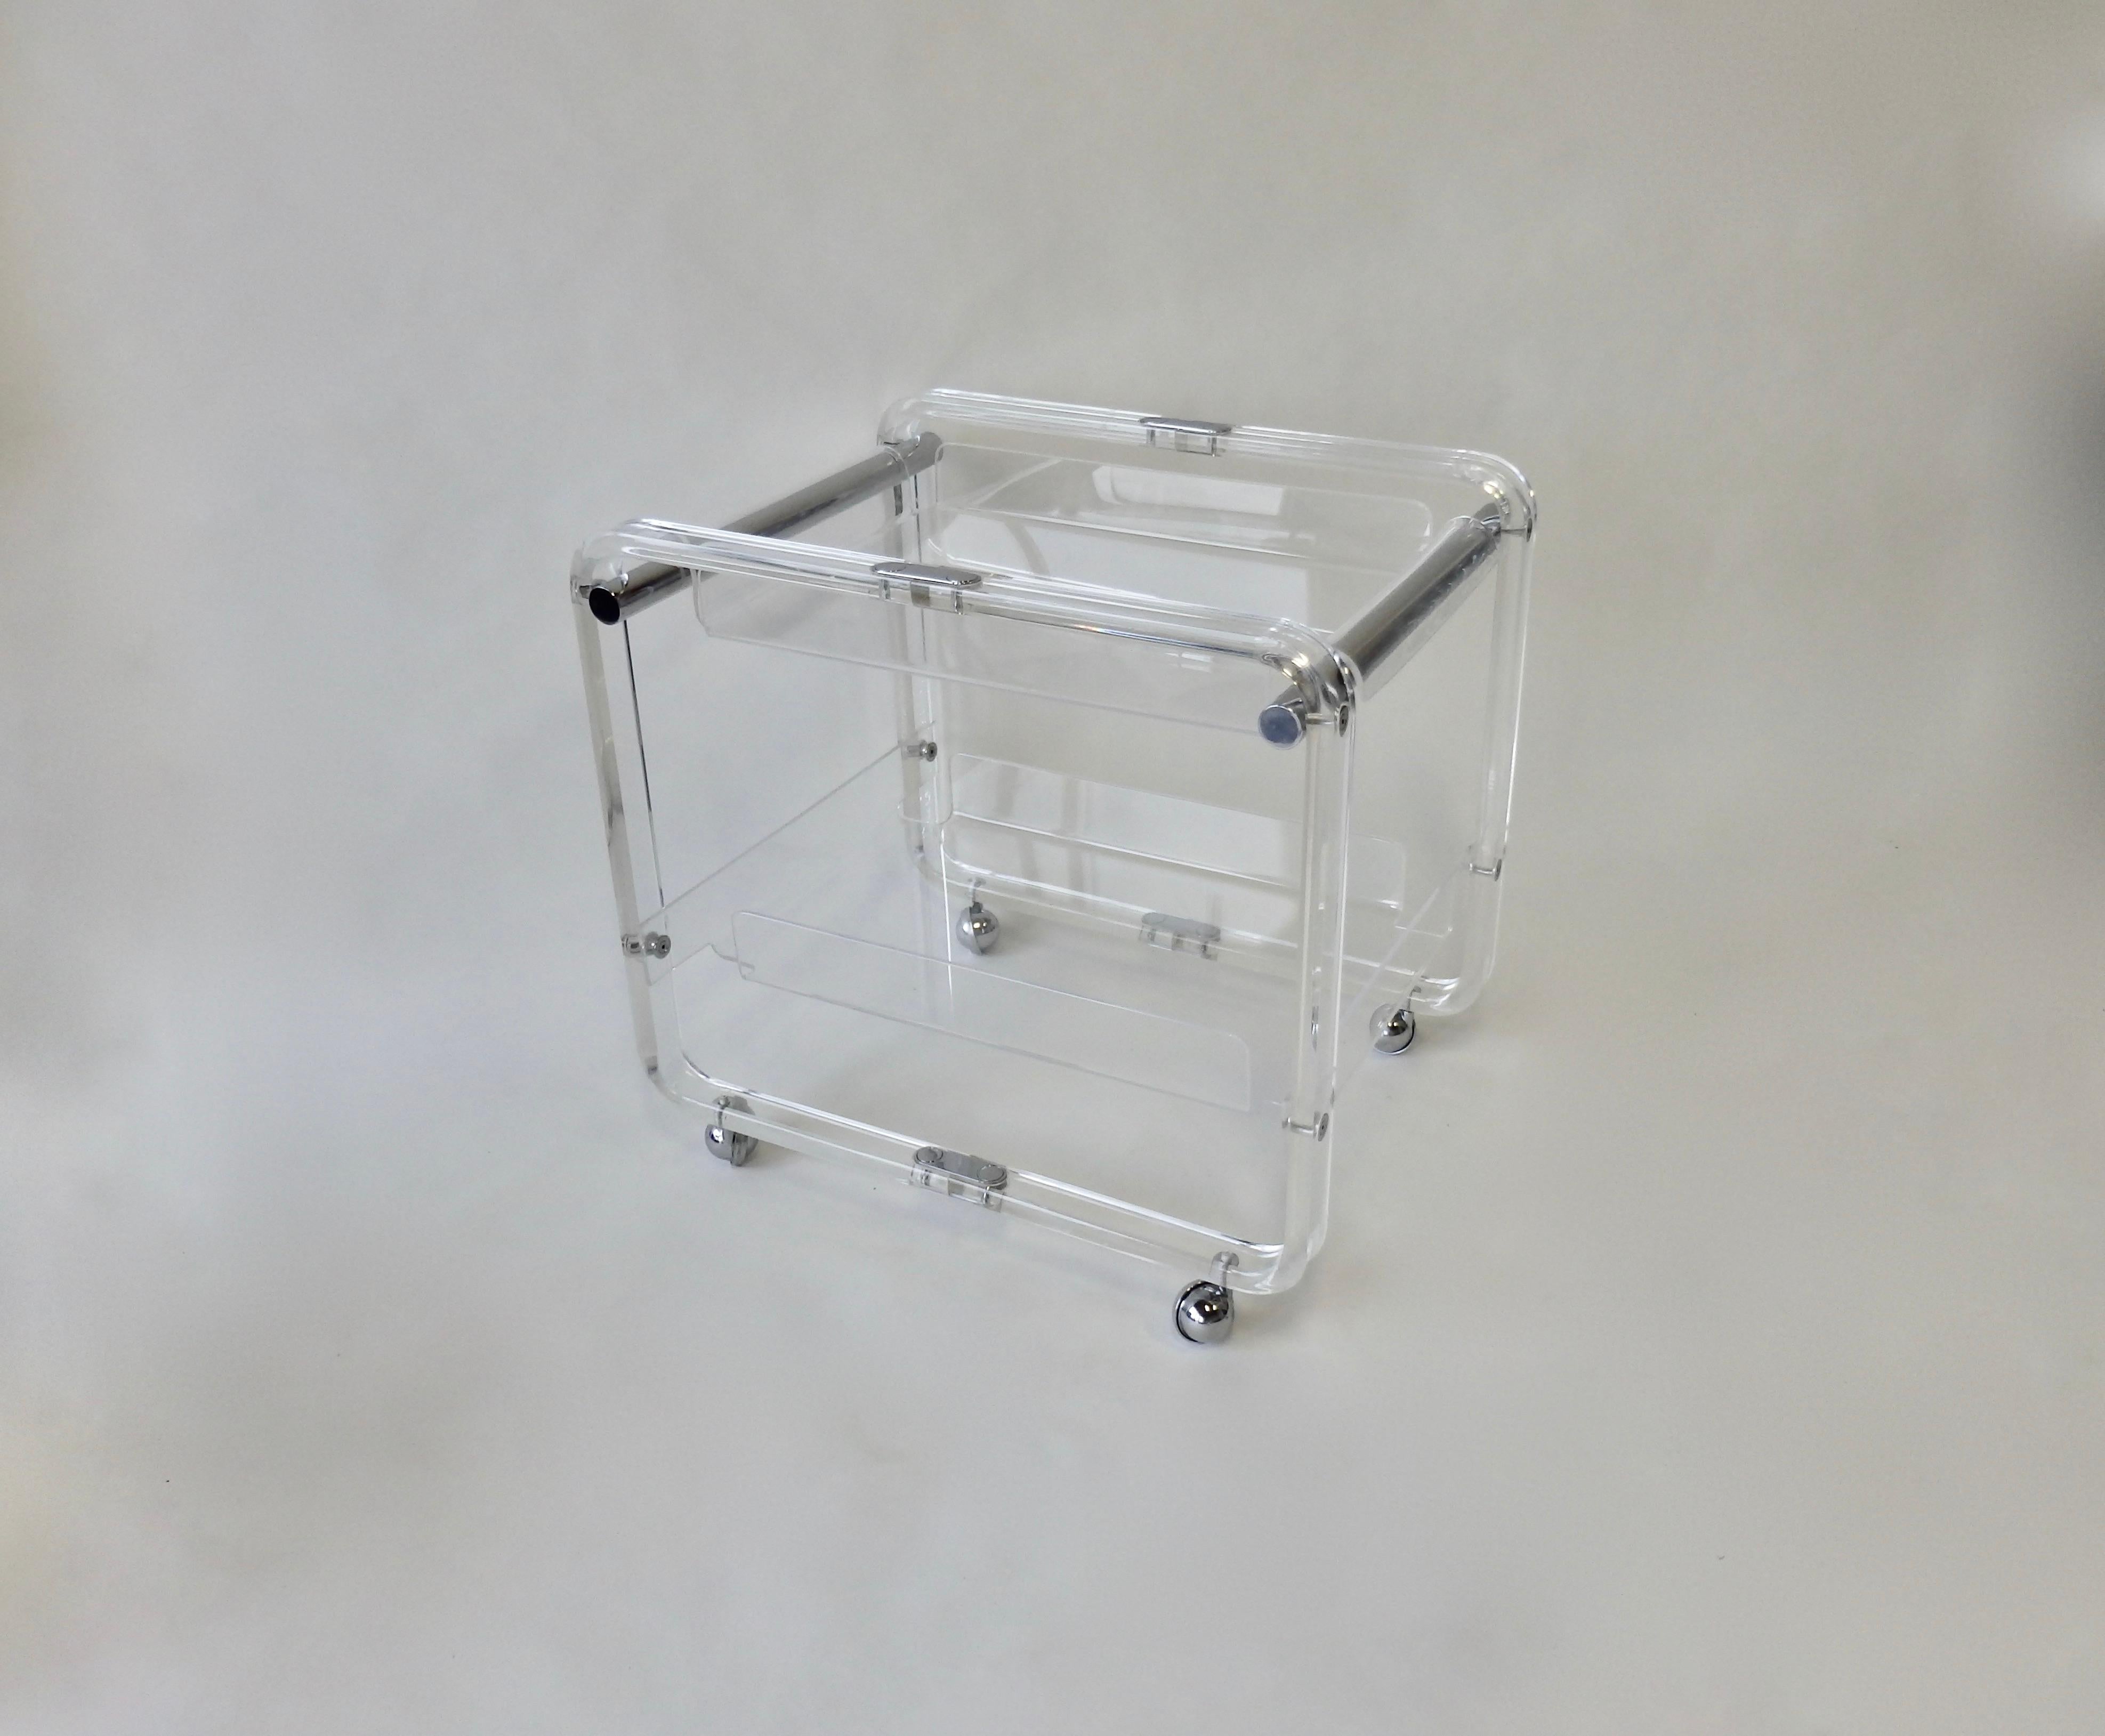 Charles Hollis Jones style Lucite bar or tea cart. Two tiers with upper level made to lift off as serving tray. Nicely machined chrome fasteners act as detail throughout. Rolls on chrome ball casters.